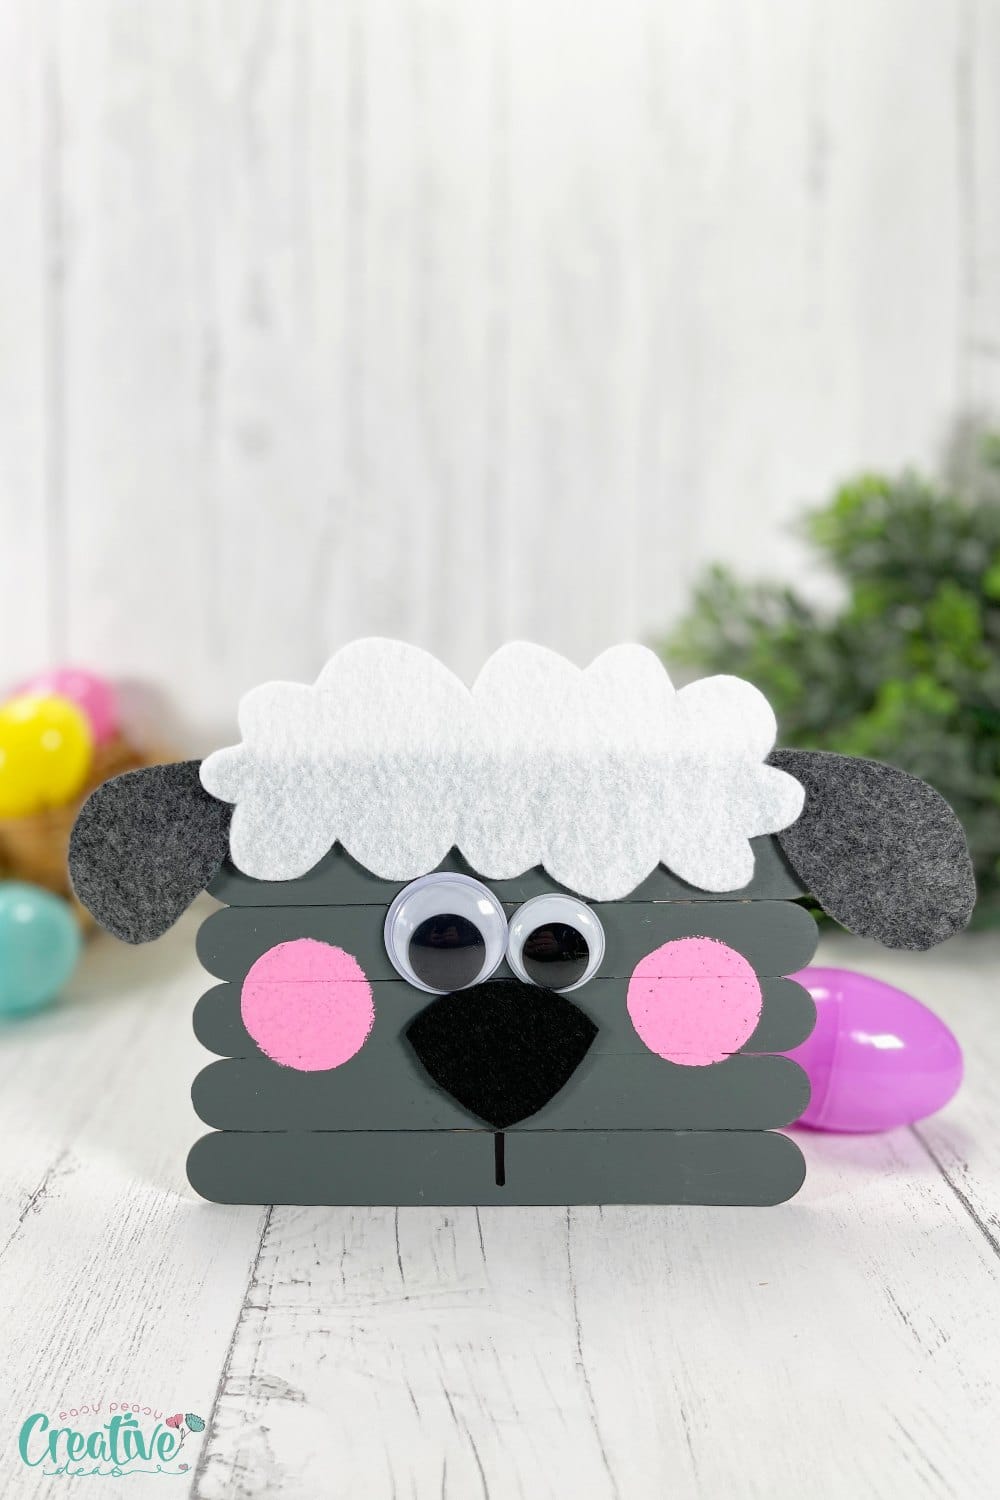 Sheep craft for Easter with craft sticks